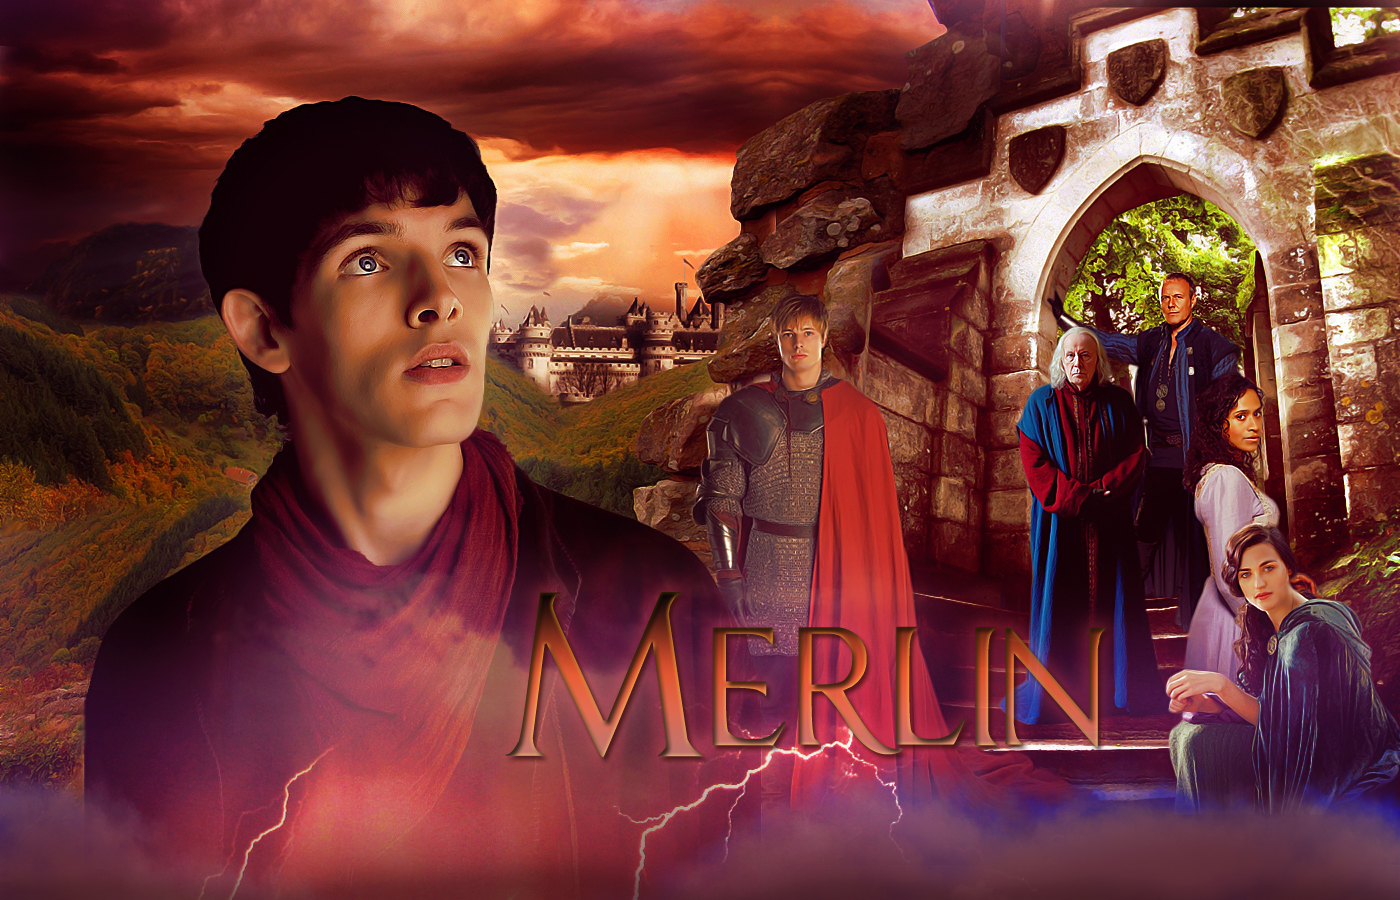 Merlin Poster Gallery3 Tv Series Posters And Cast